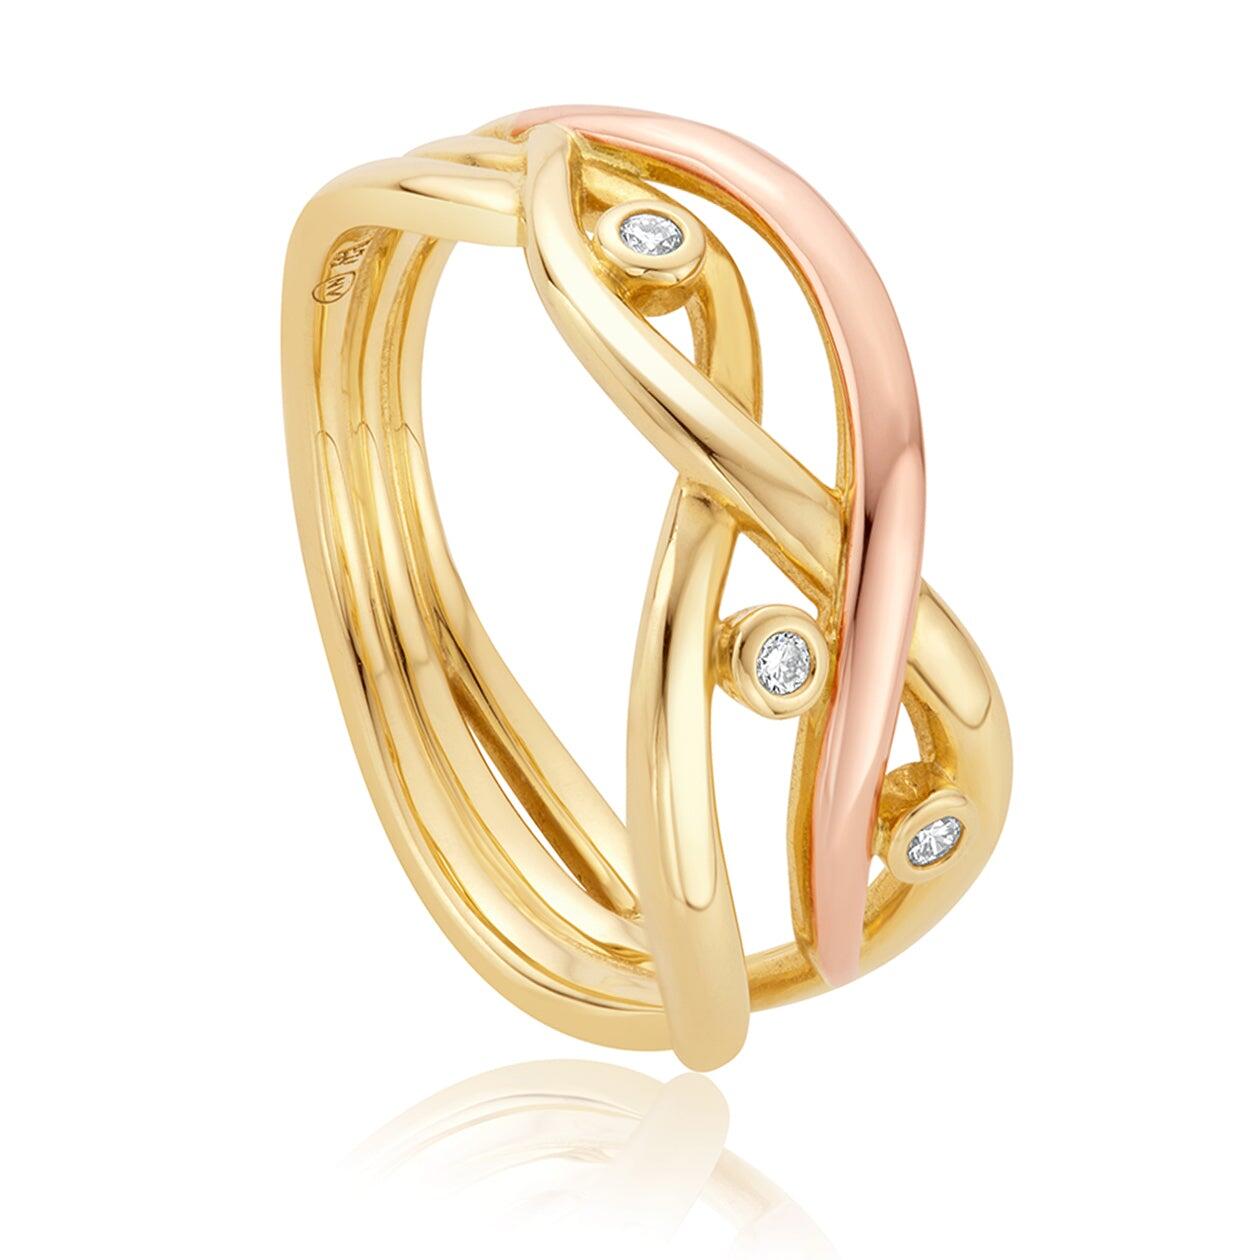 Clogau Swallow Falls 18ct Gold Diamond Ring - Default Title / Gold